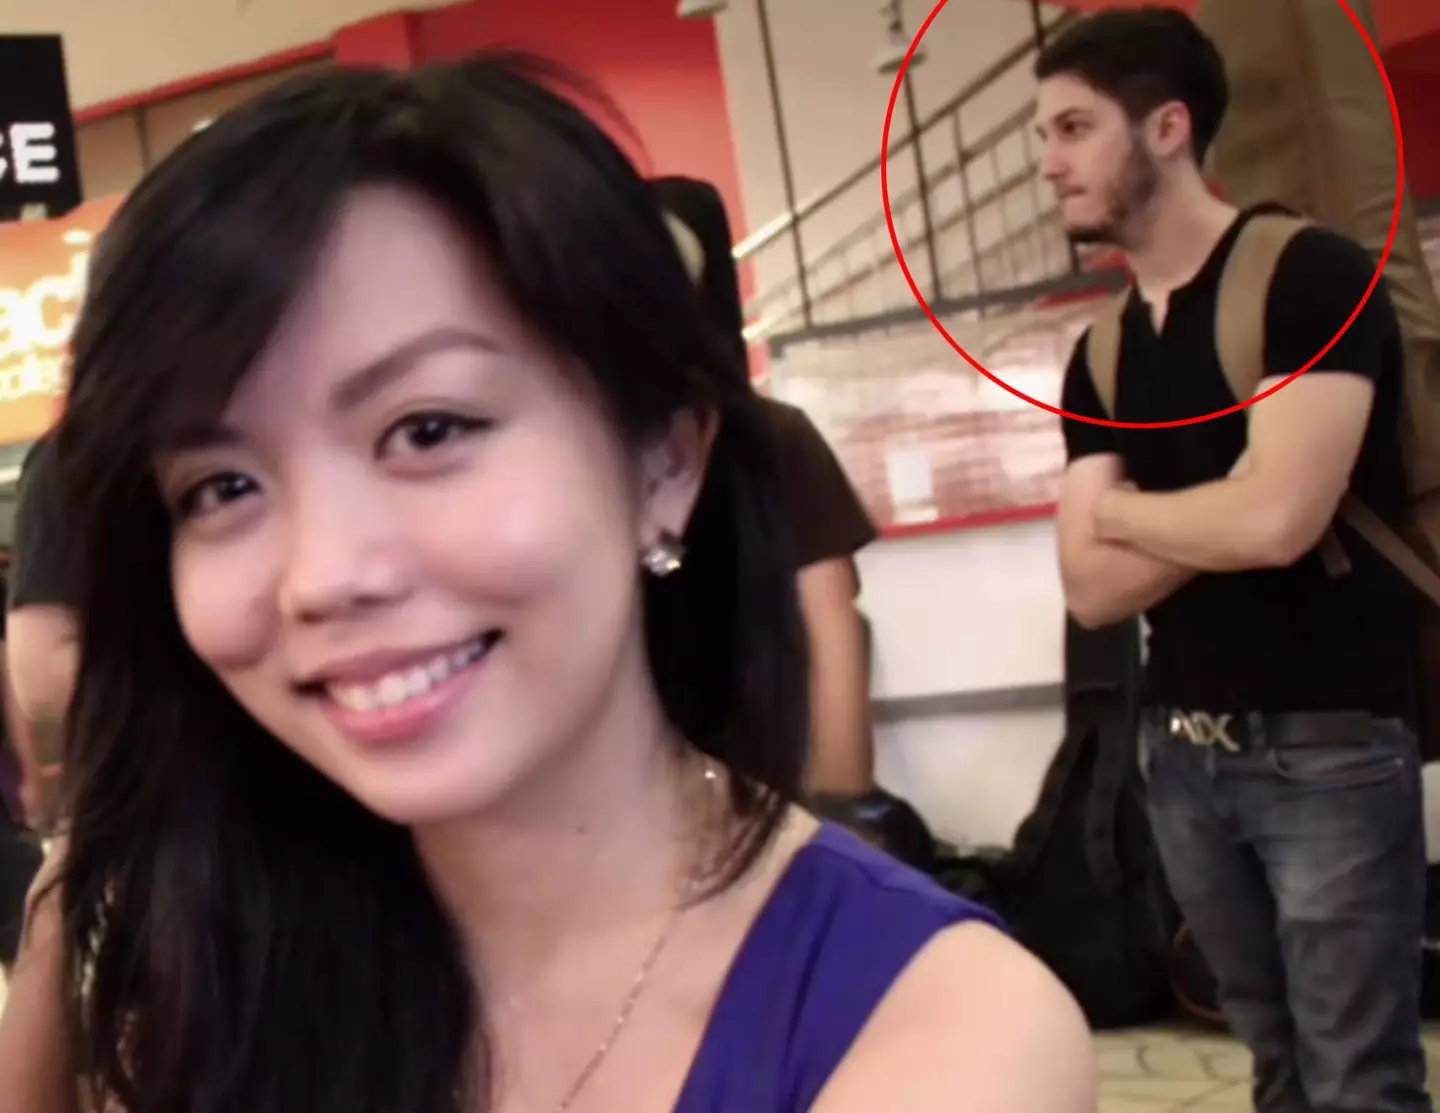 She realised the man in the background was her husband years before they met.